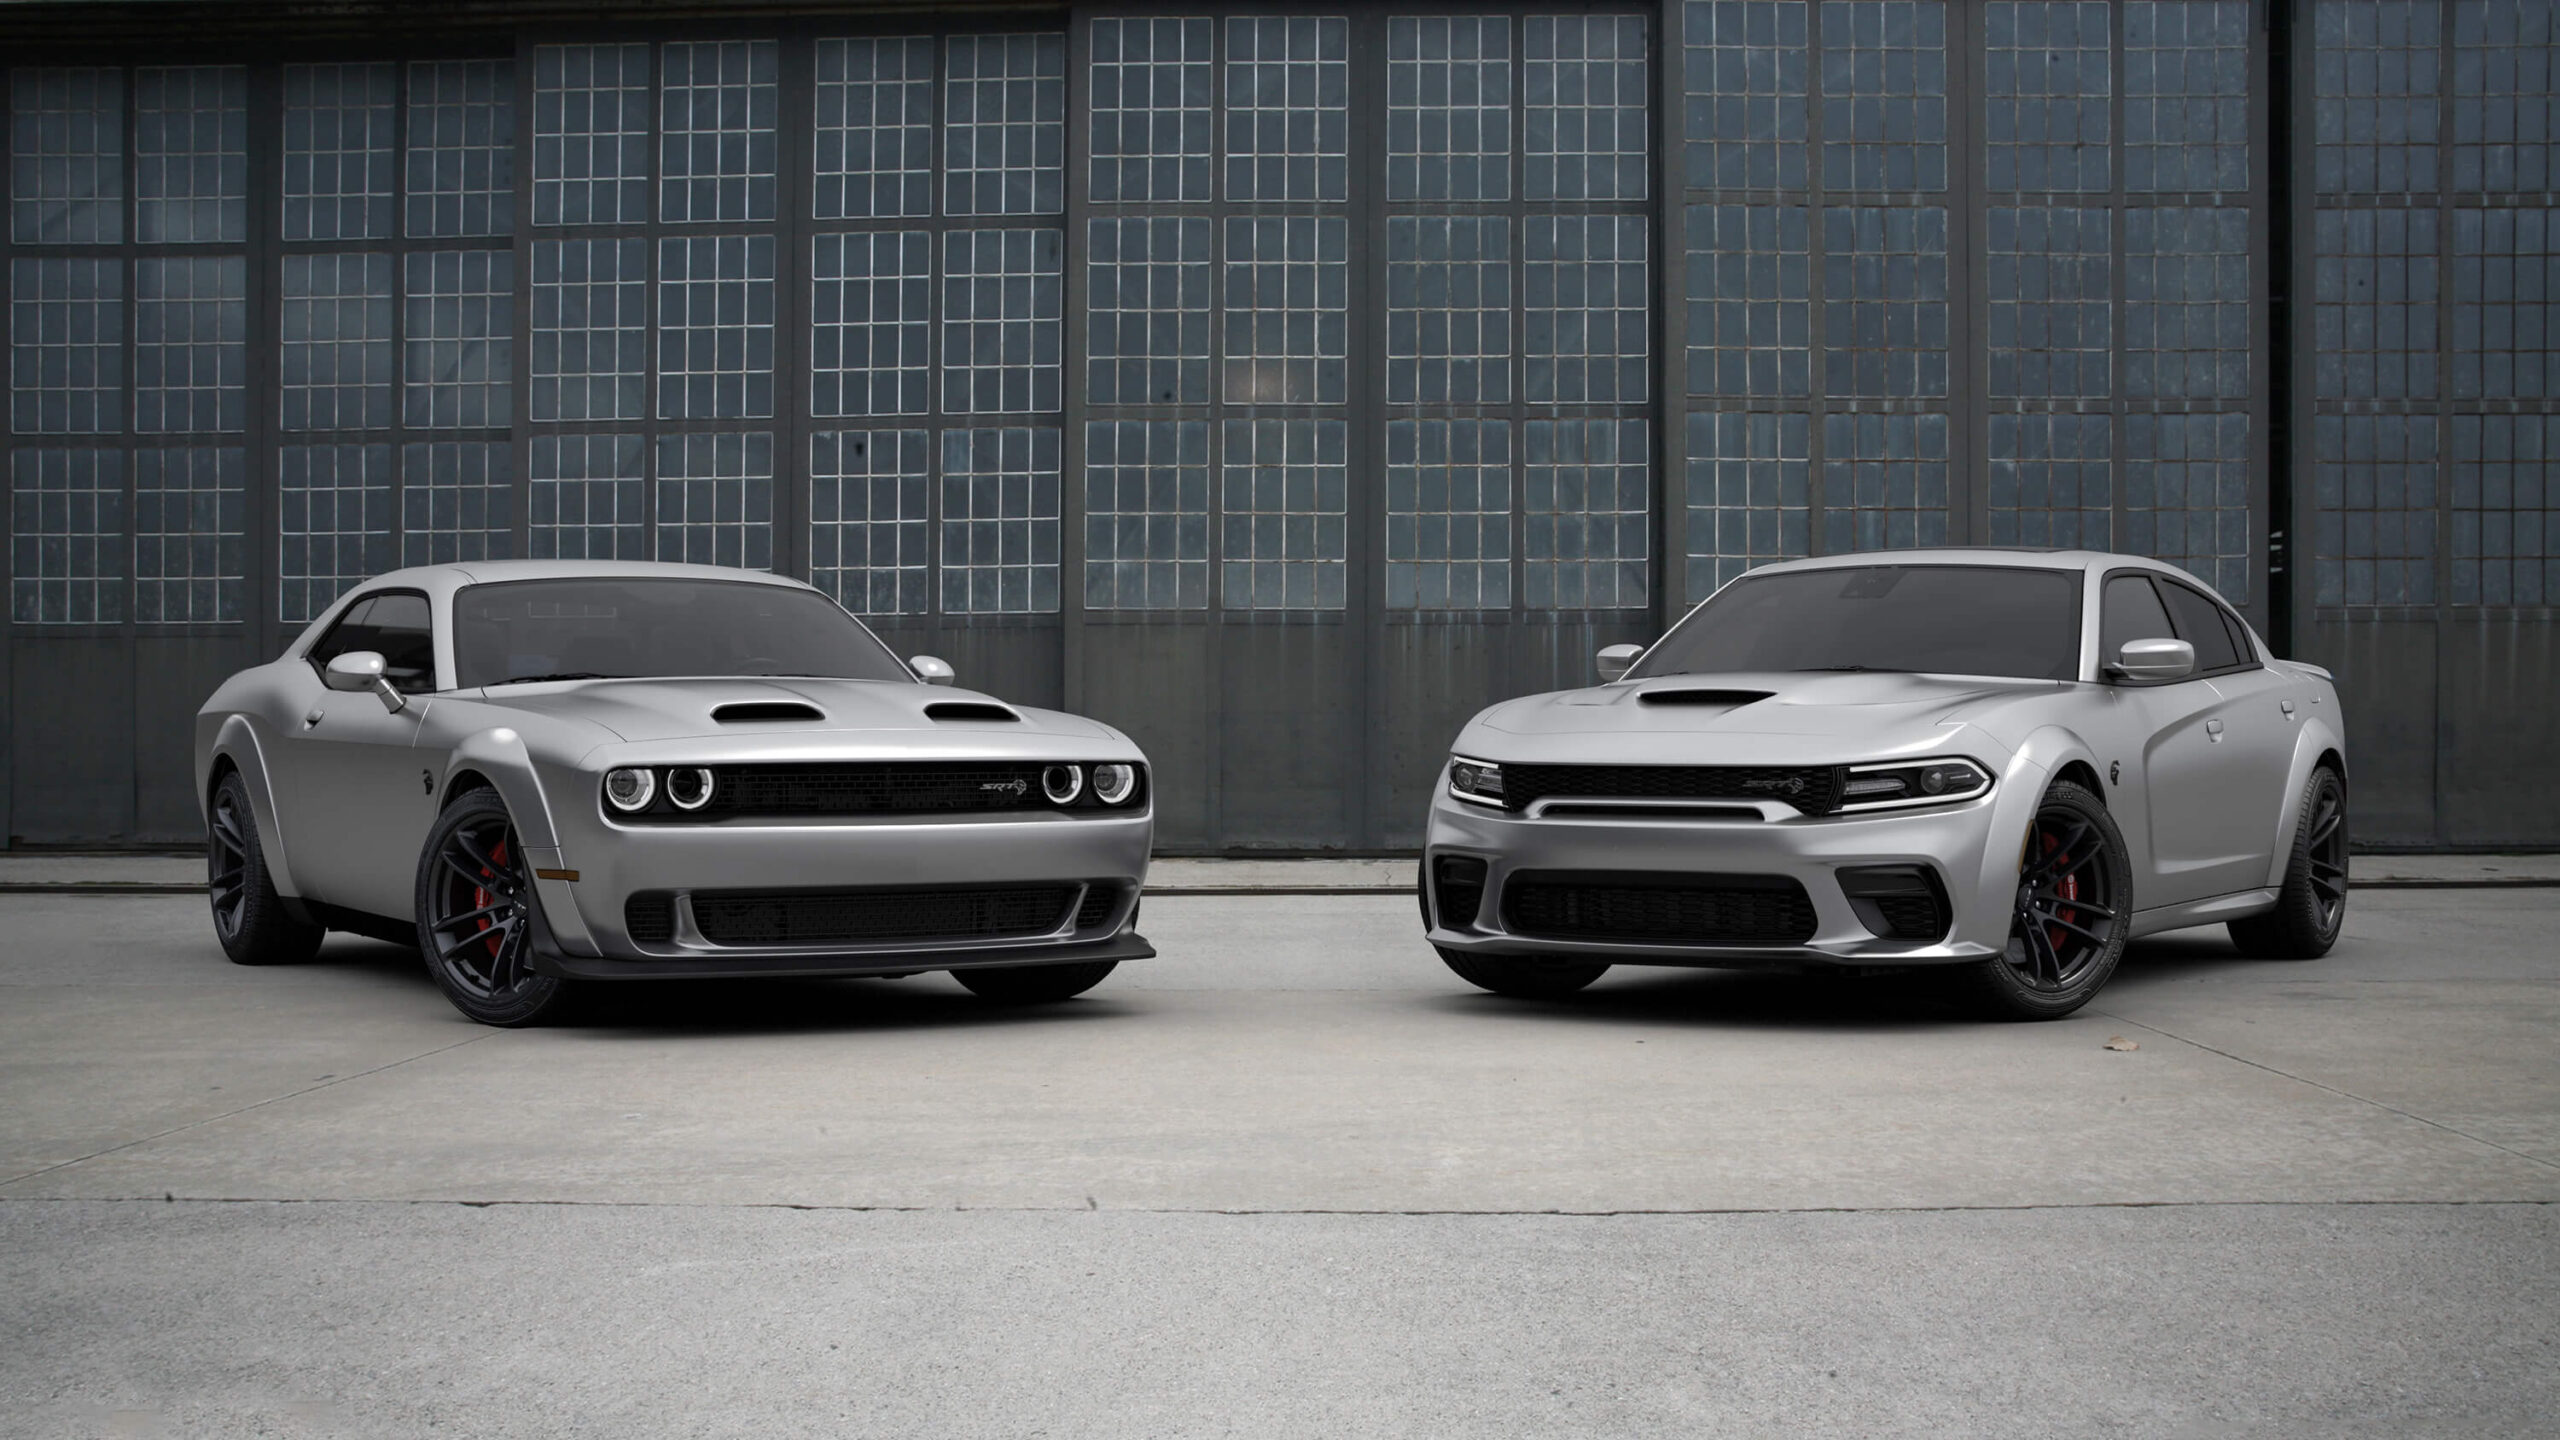 Dodge Boys: Charger vs. Challenger – A Comparison of Modern Muscle